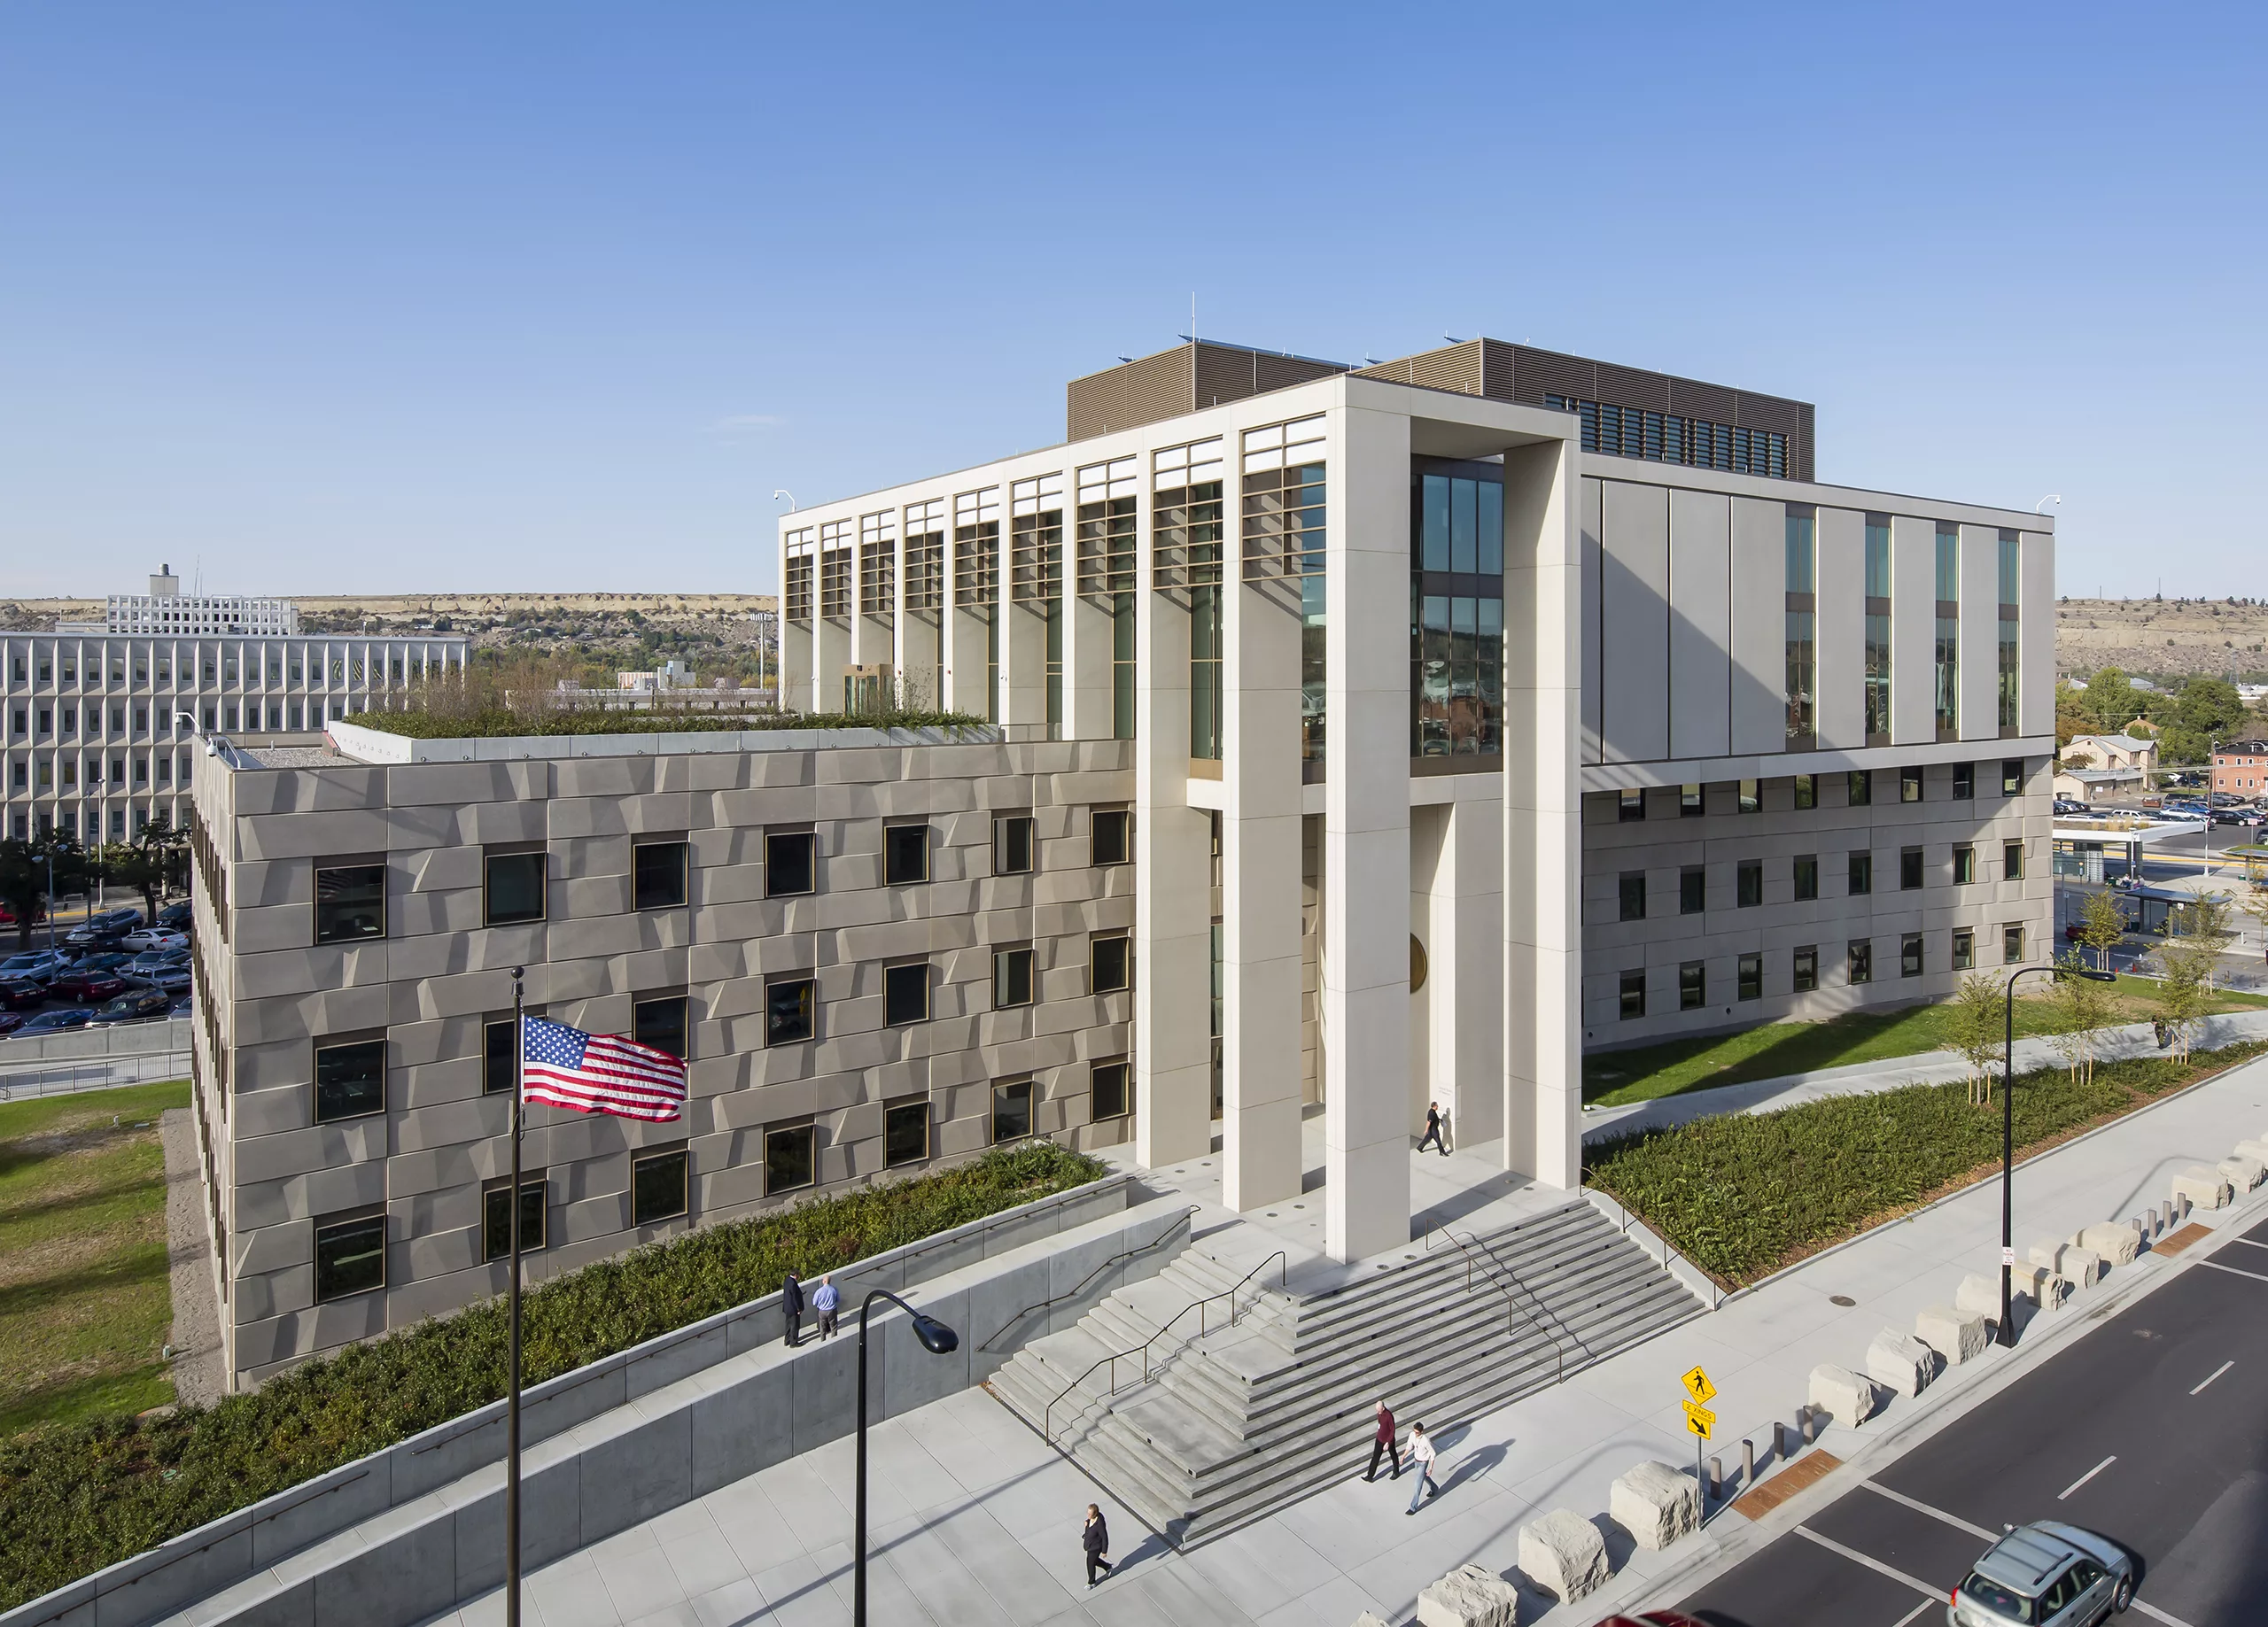 Aerial daylight view of the six-story James F. Battin United States Courthouse featuring rooftop photovoltaic panels, steps leading to the entrance, sidewalk landscaping, and stone bollards adjacent to a two-lane road